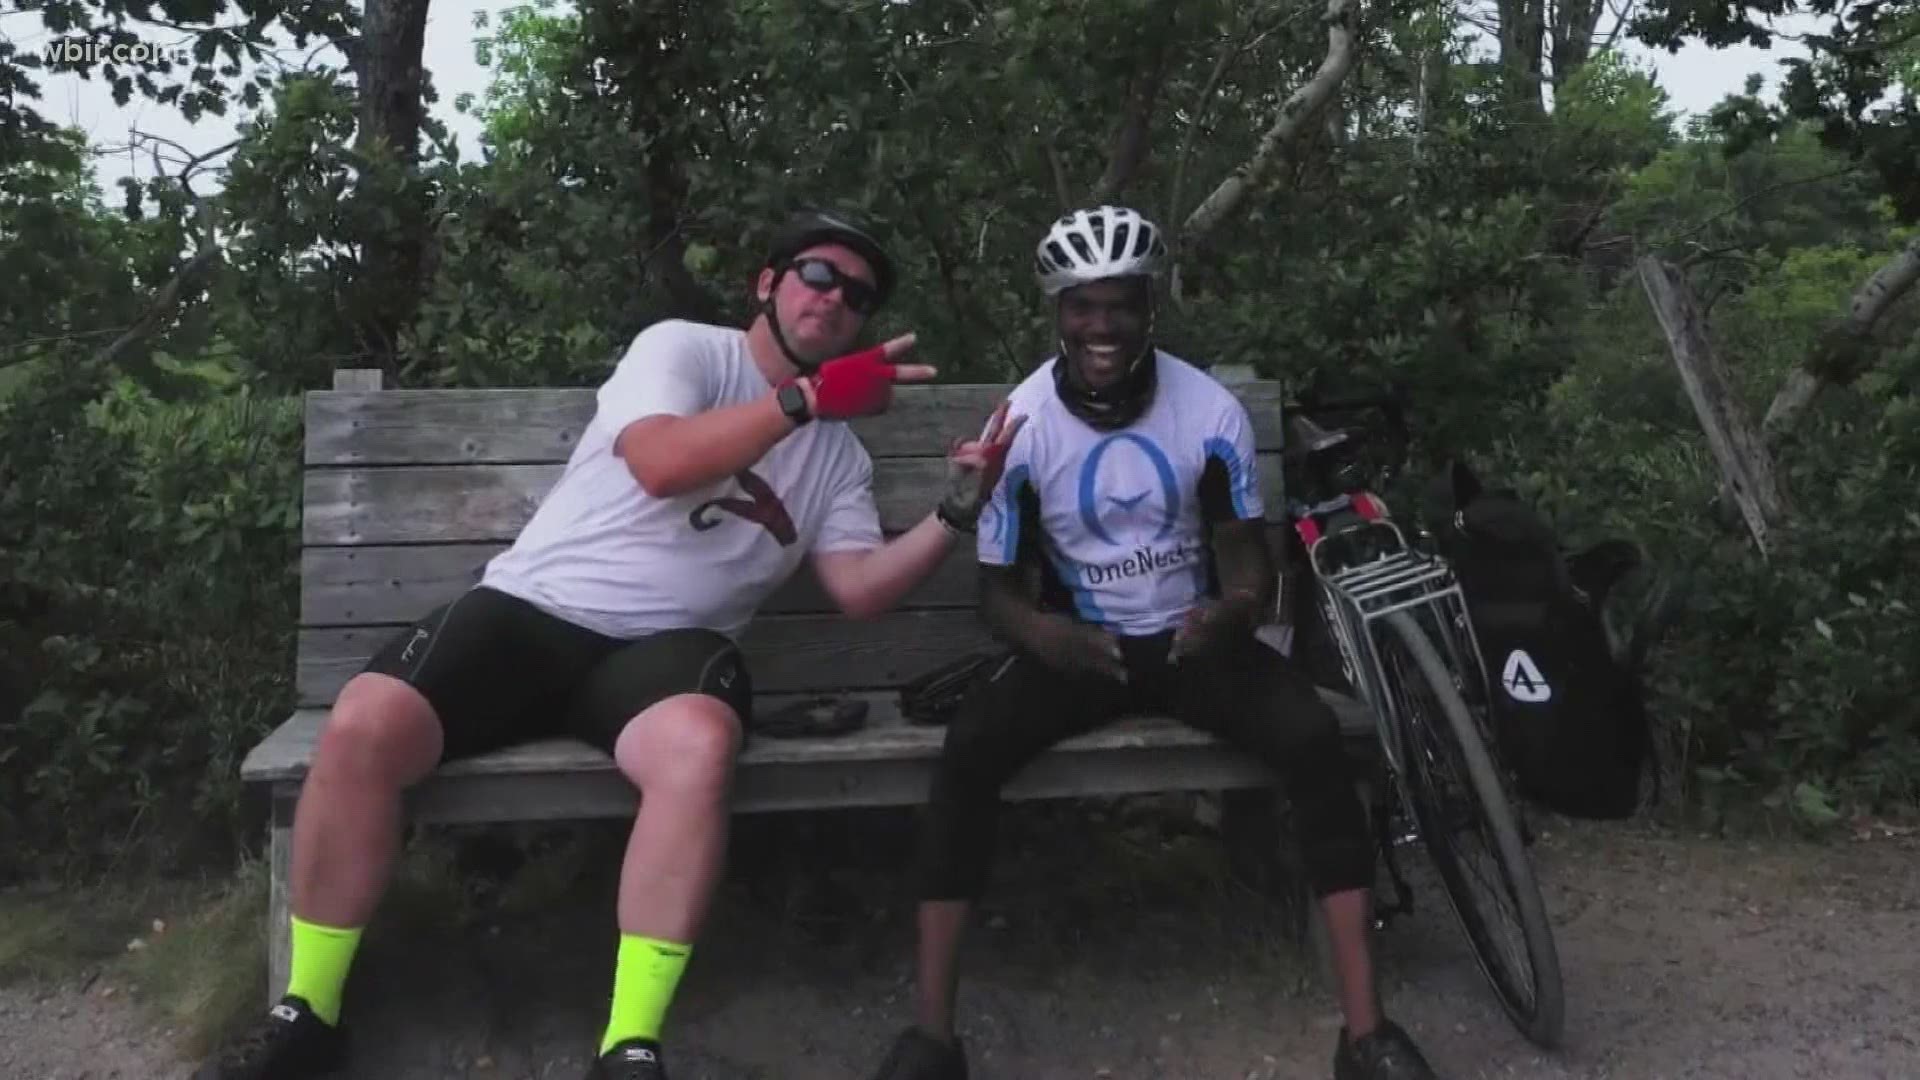 Two men with a lot of differences have come together for one common goal — to bike across the country.